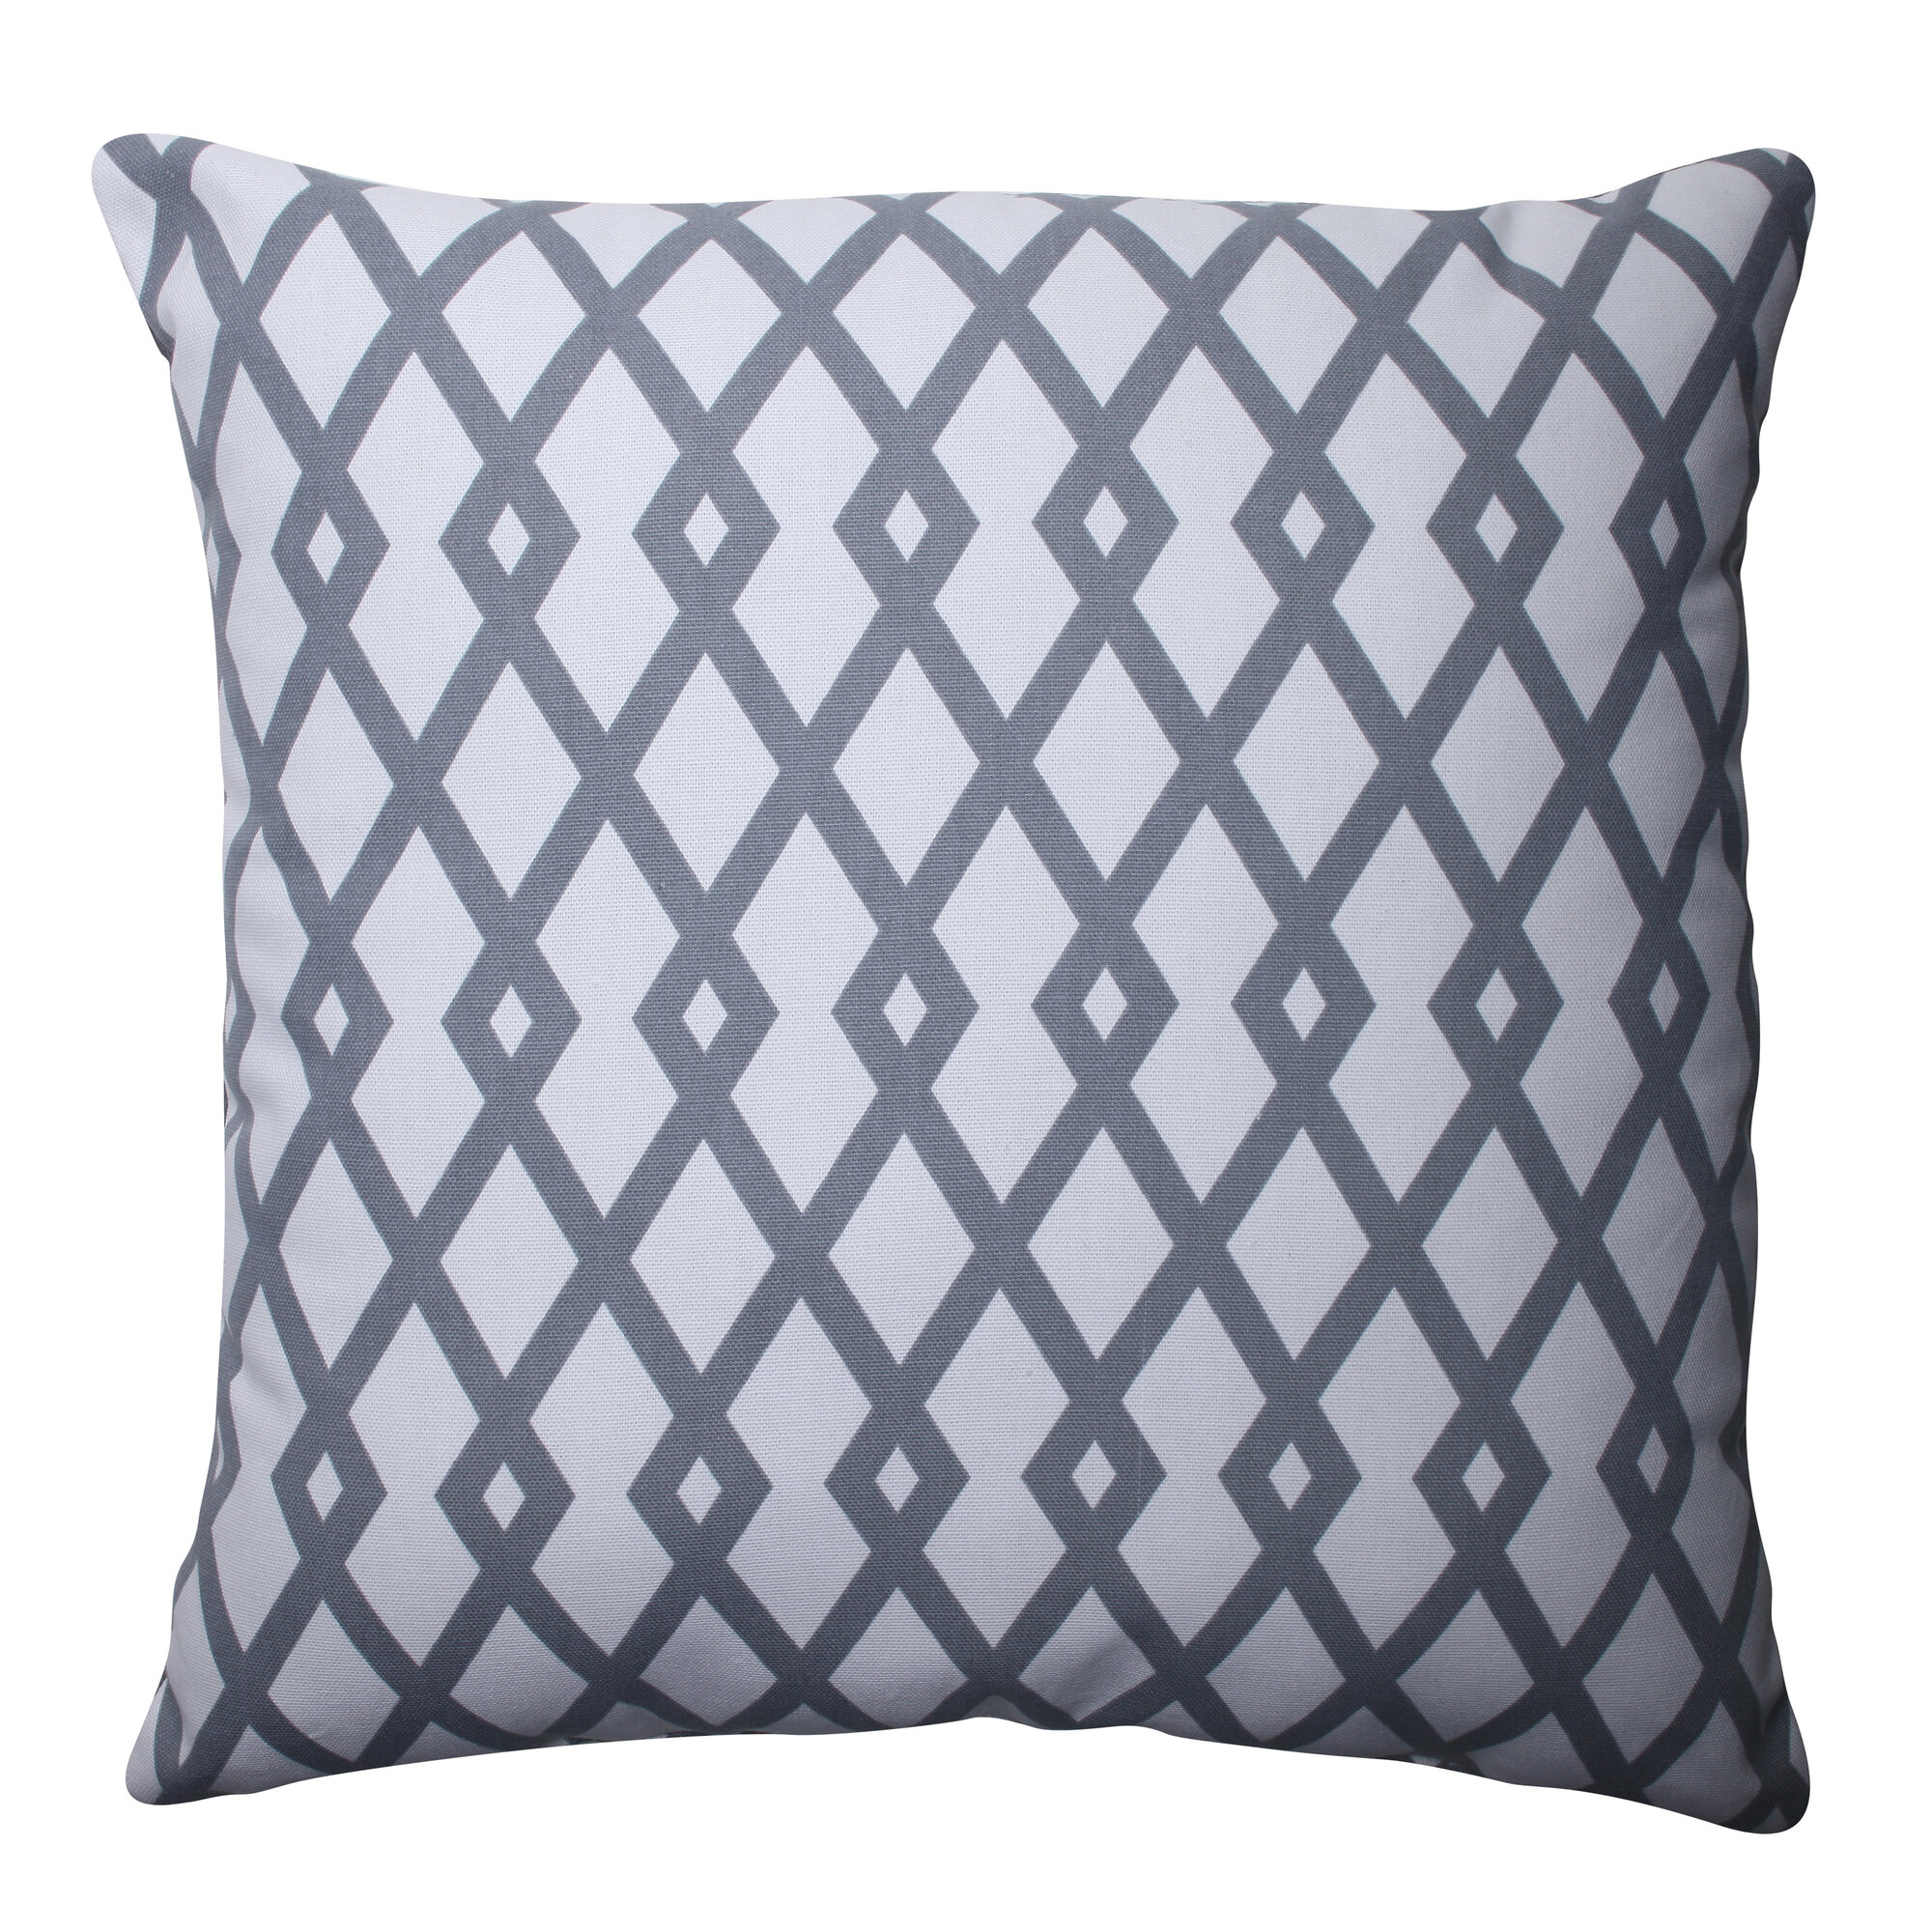 Graphic Throw Pillow